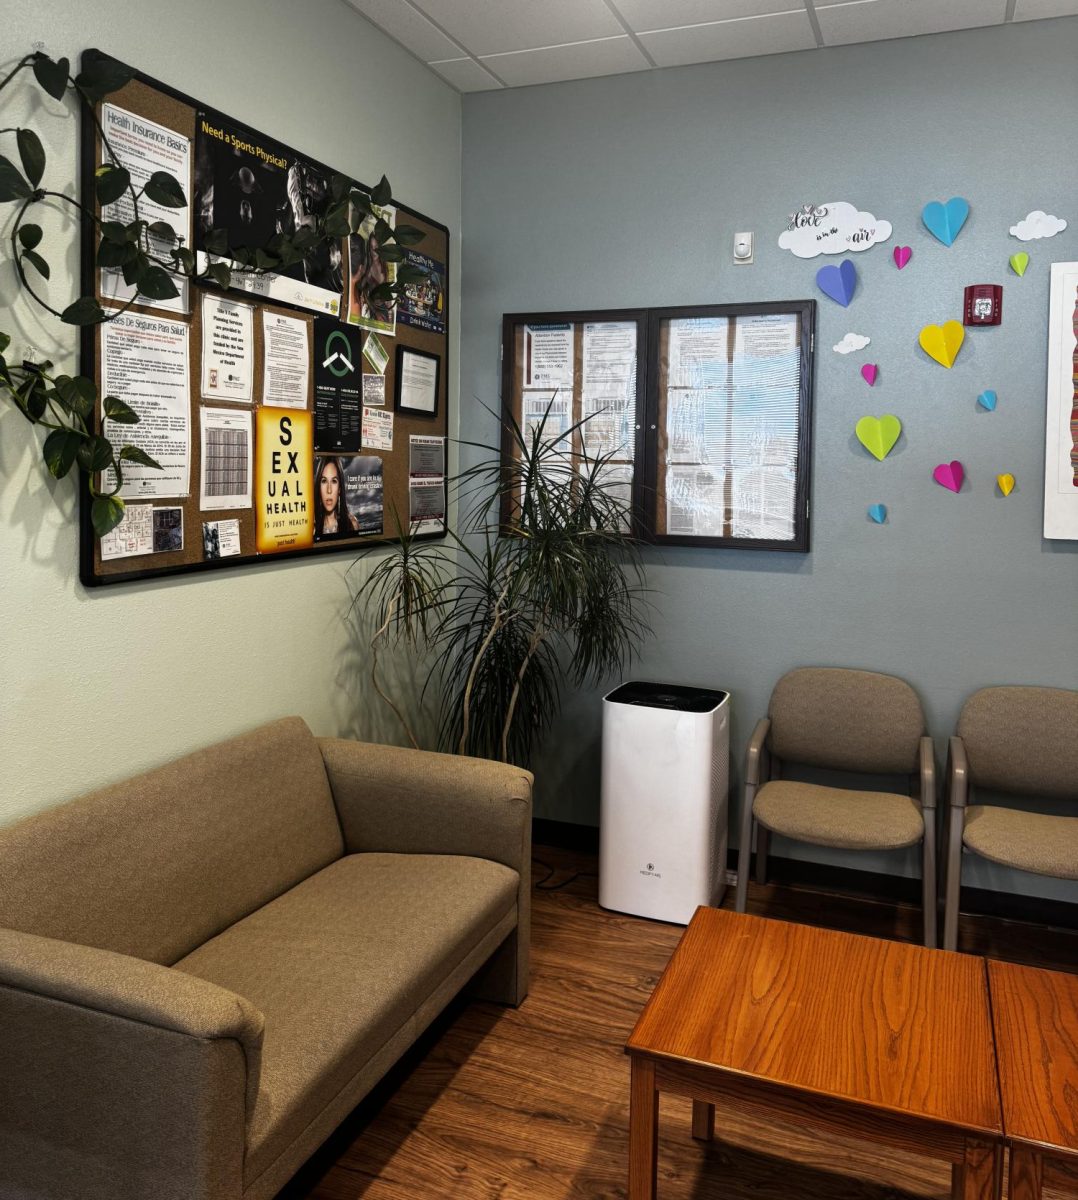 Teen Health Center: Free, Confidential, and HERE